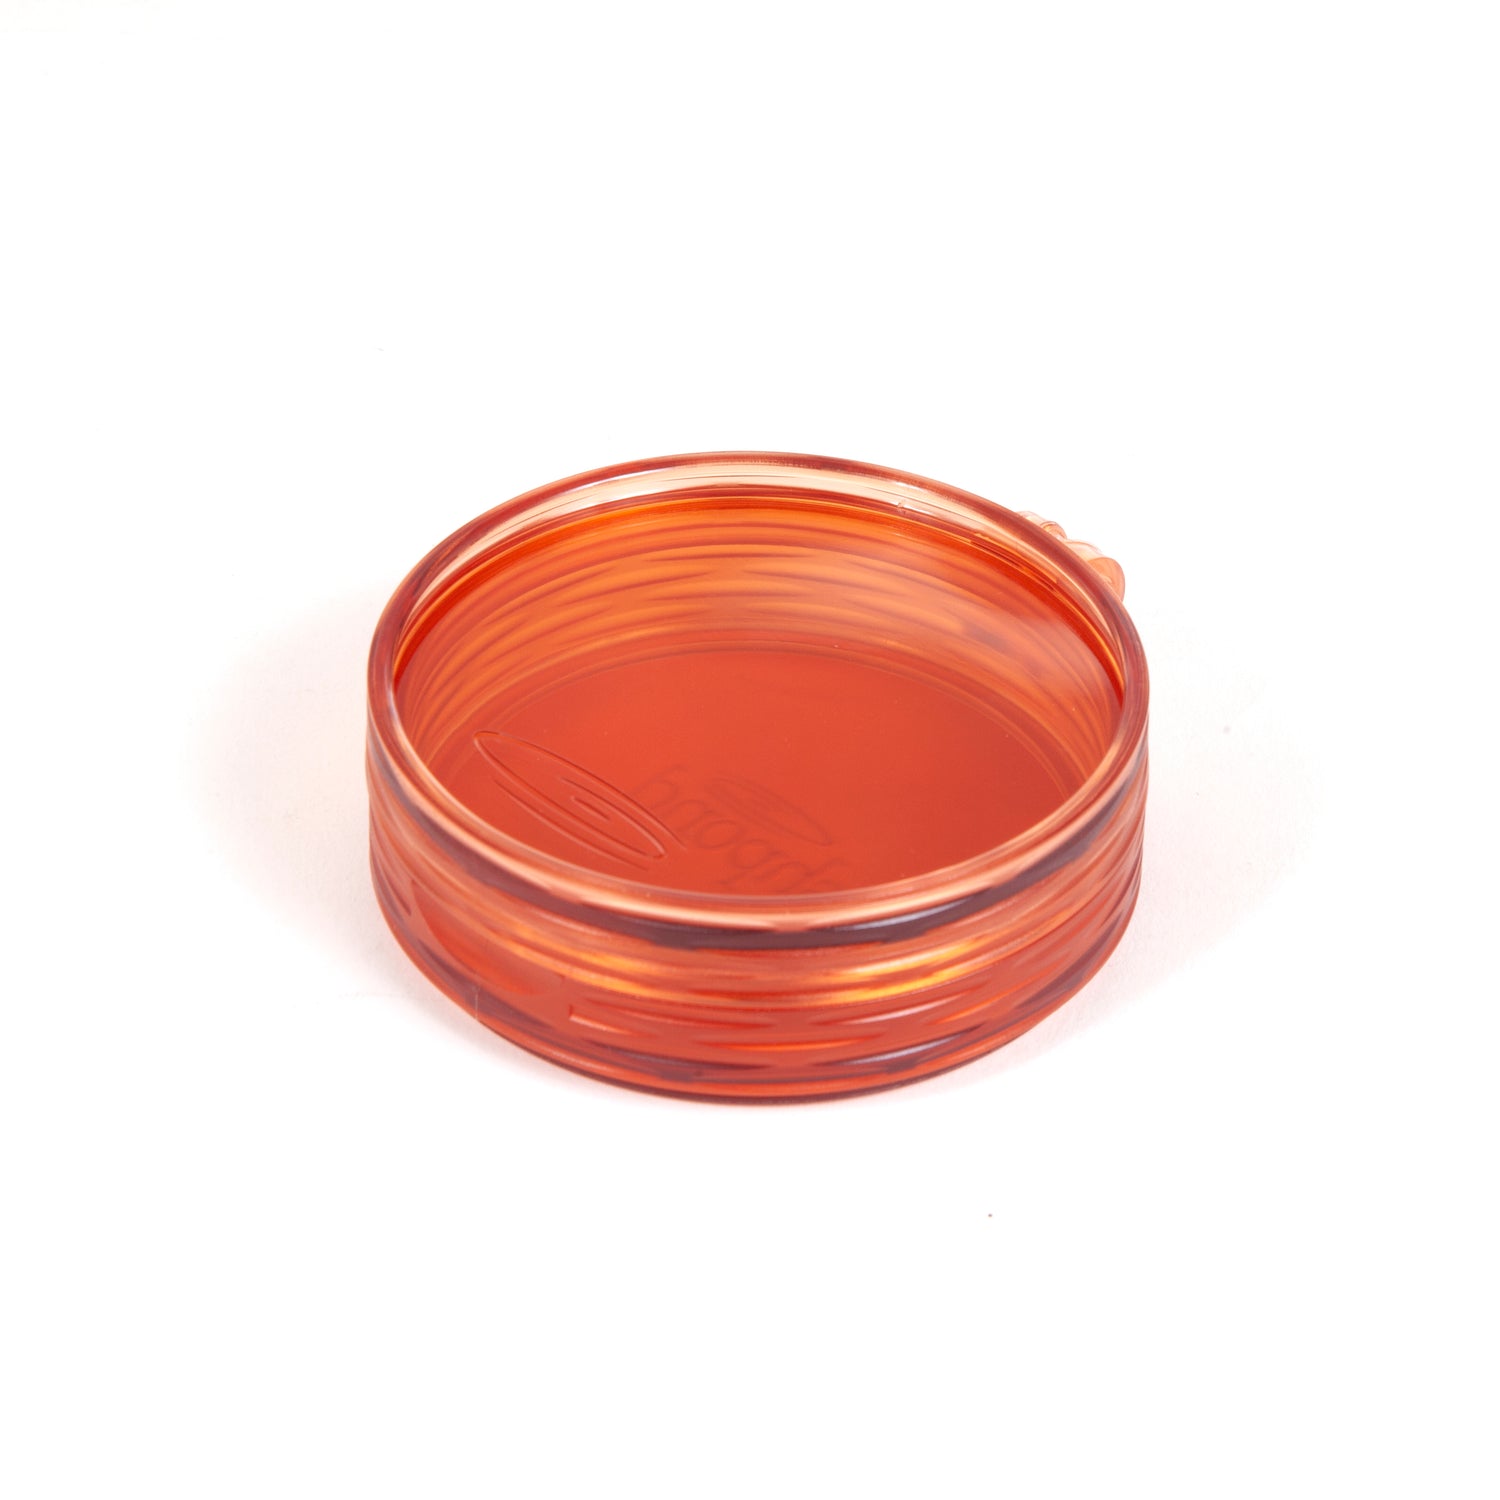 Shallow Fly Puck – Fishpond